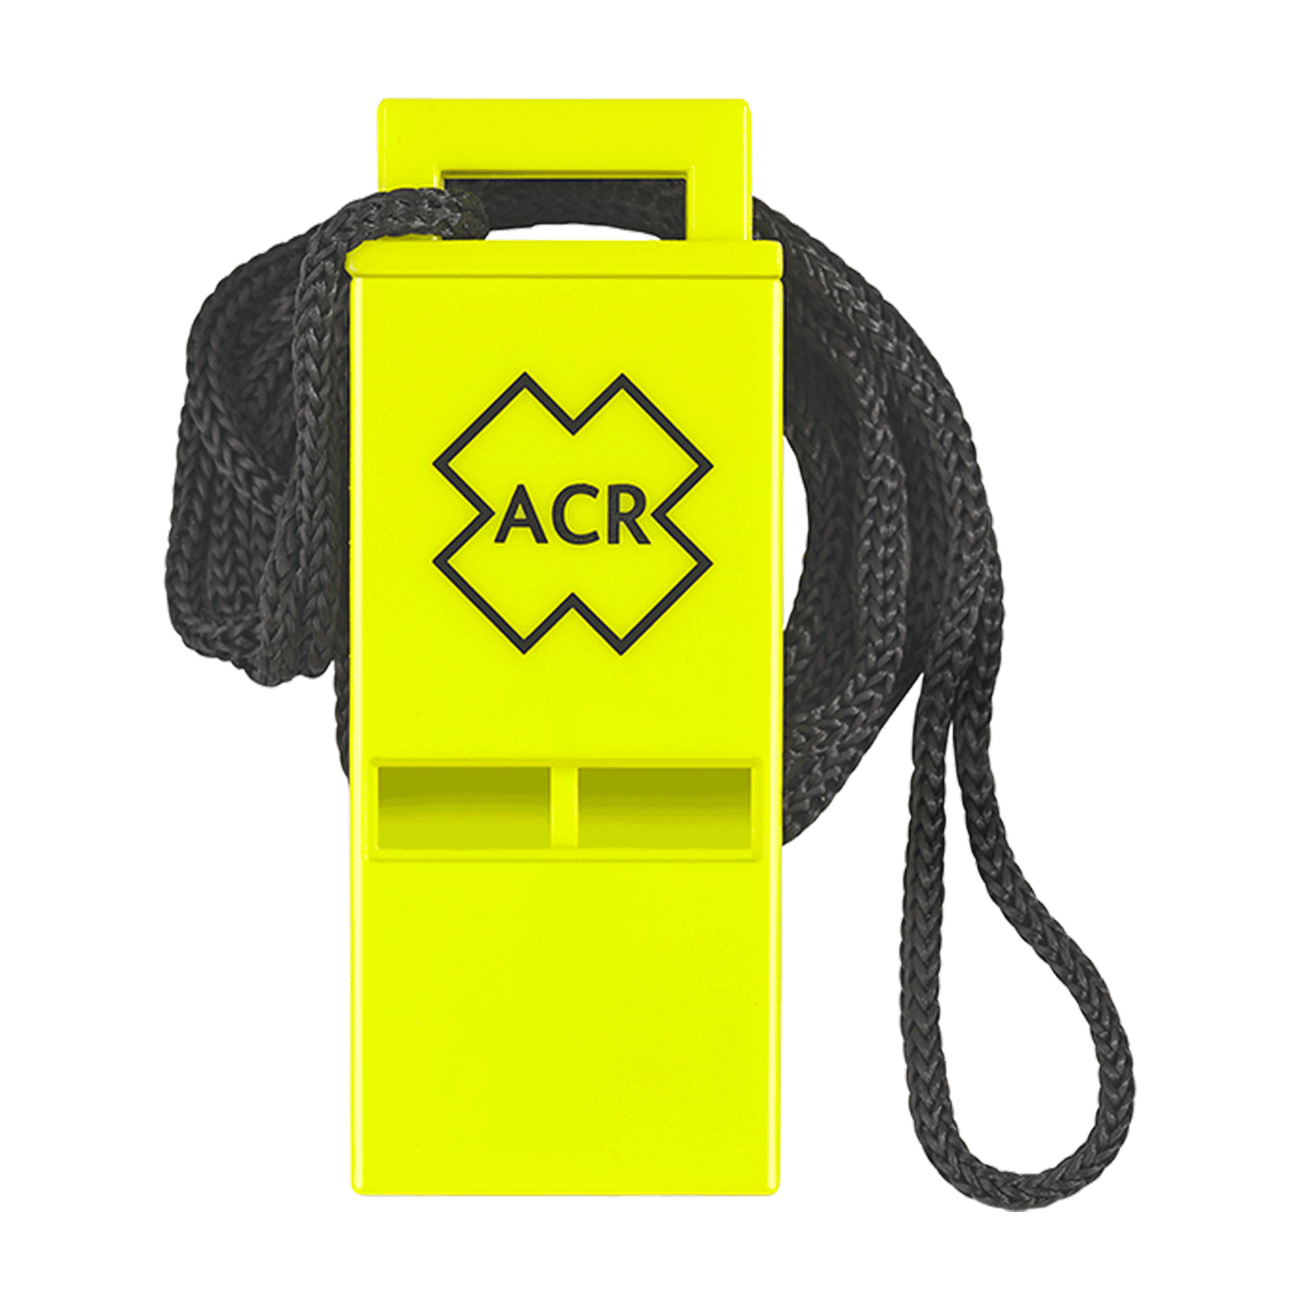 Boat Marine Hiking Safety ACR RES-Q Whistle w/Lanyard USCG  & SOLAS 83 Approved 